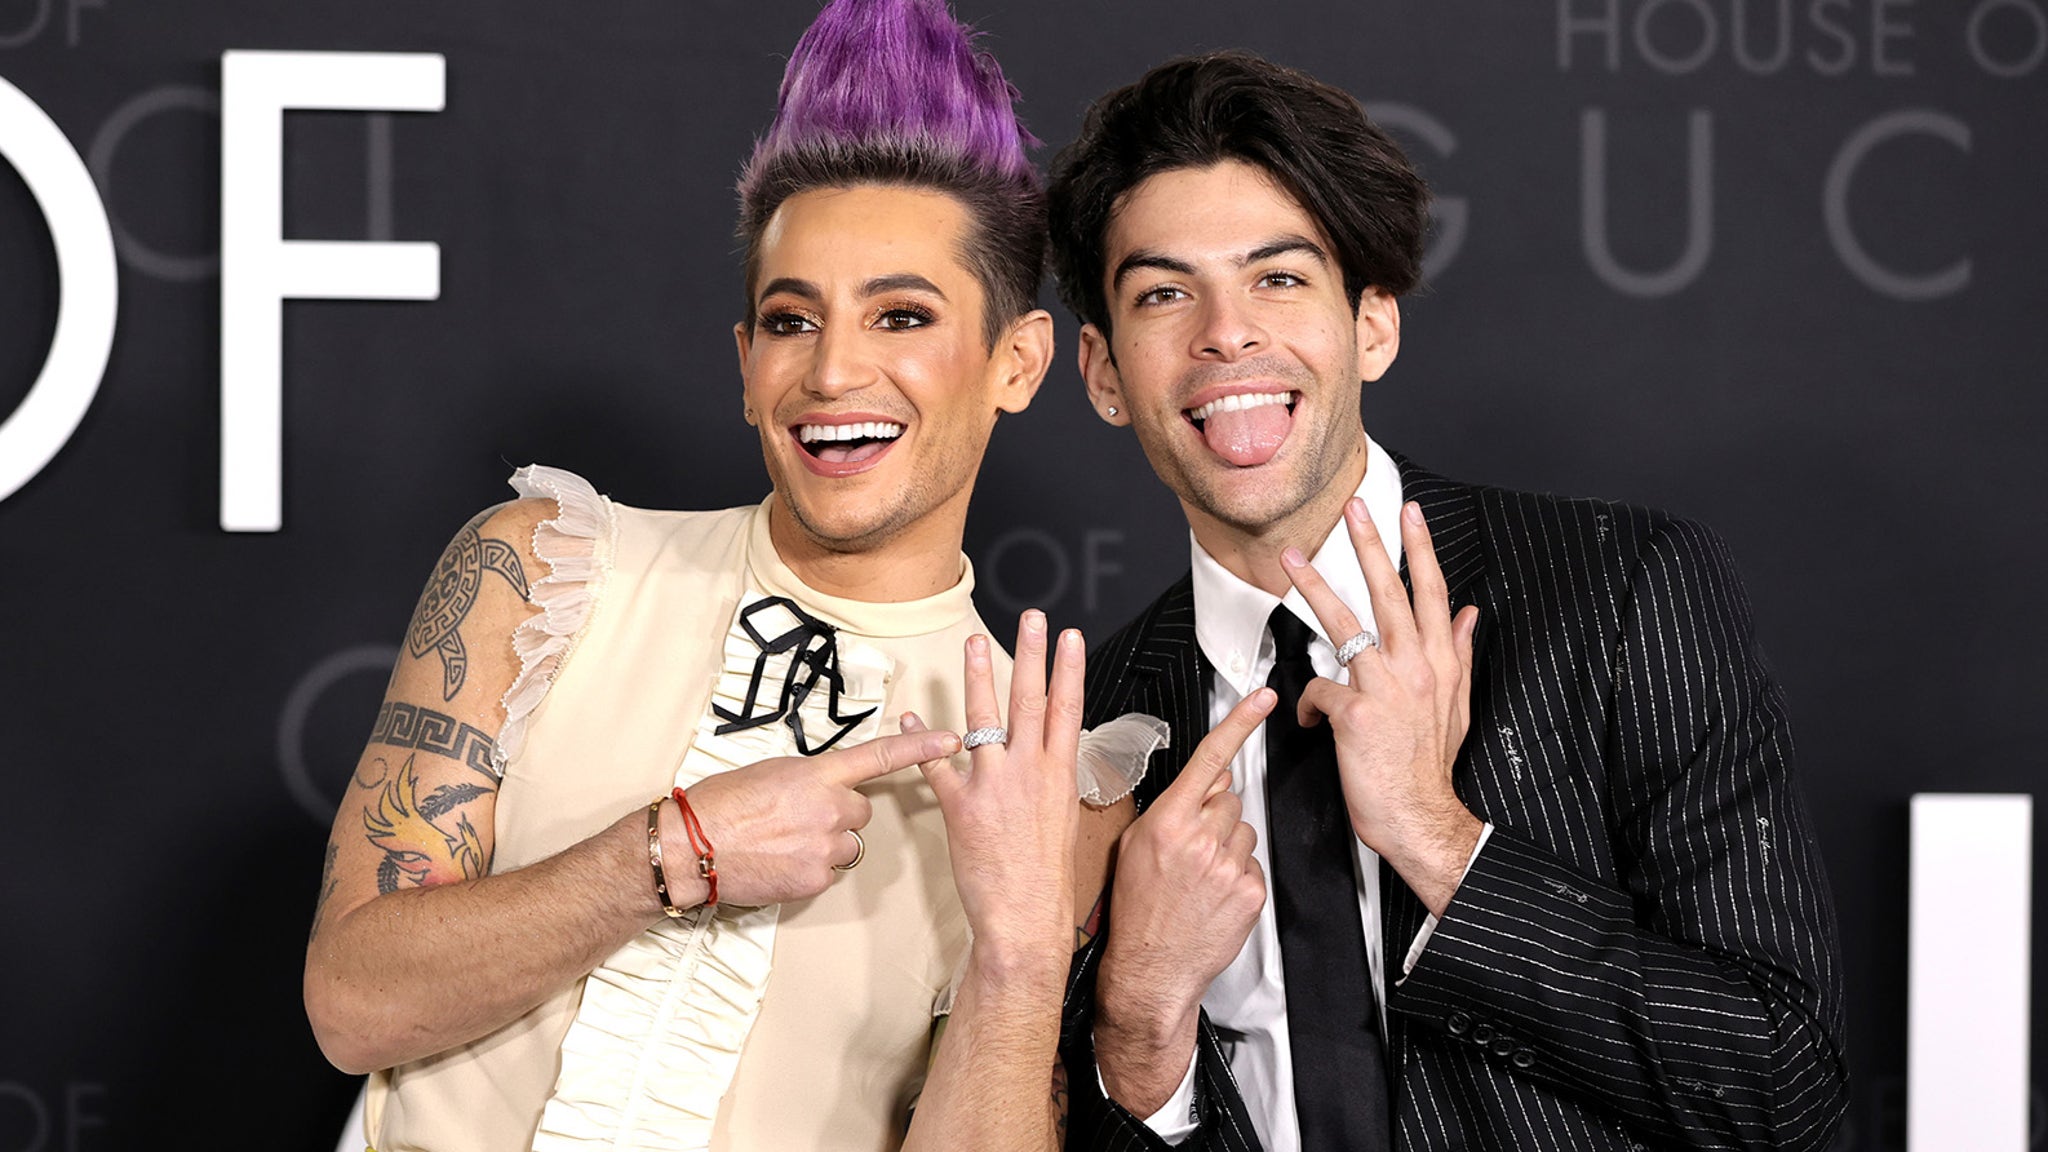 Frankie Grande Ties The Knot With Hale Leon: 'We Are Well On Our Way to Happily Ever After'